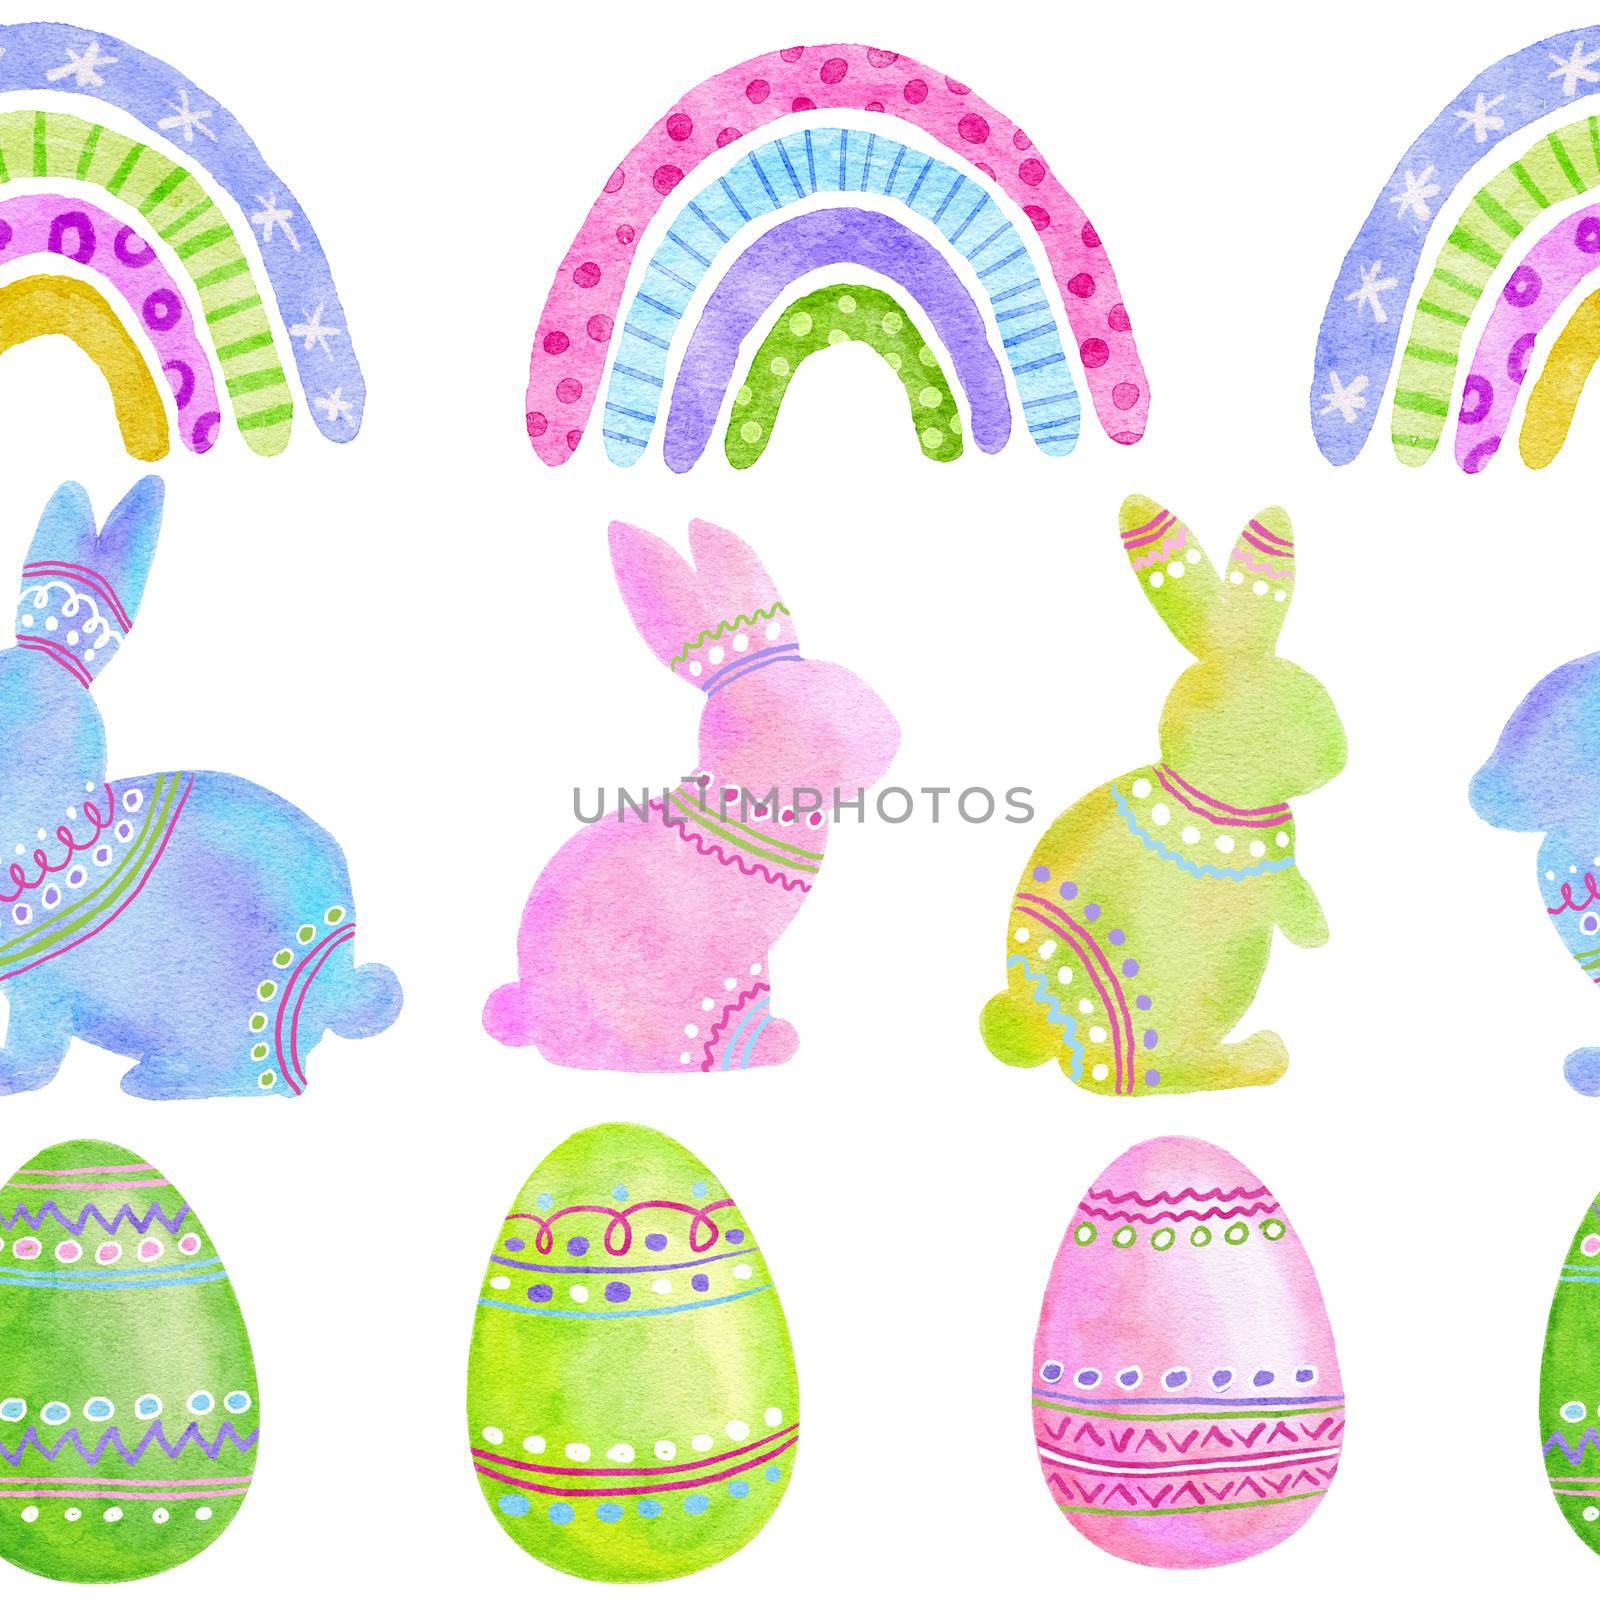 Watercolor seamless hand drawn pattern with Easter eggs bunnies rabbit raibows in pastel pink green blue colors. Spring april background for party decor wrapping paper textile. by Lagmar